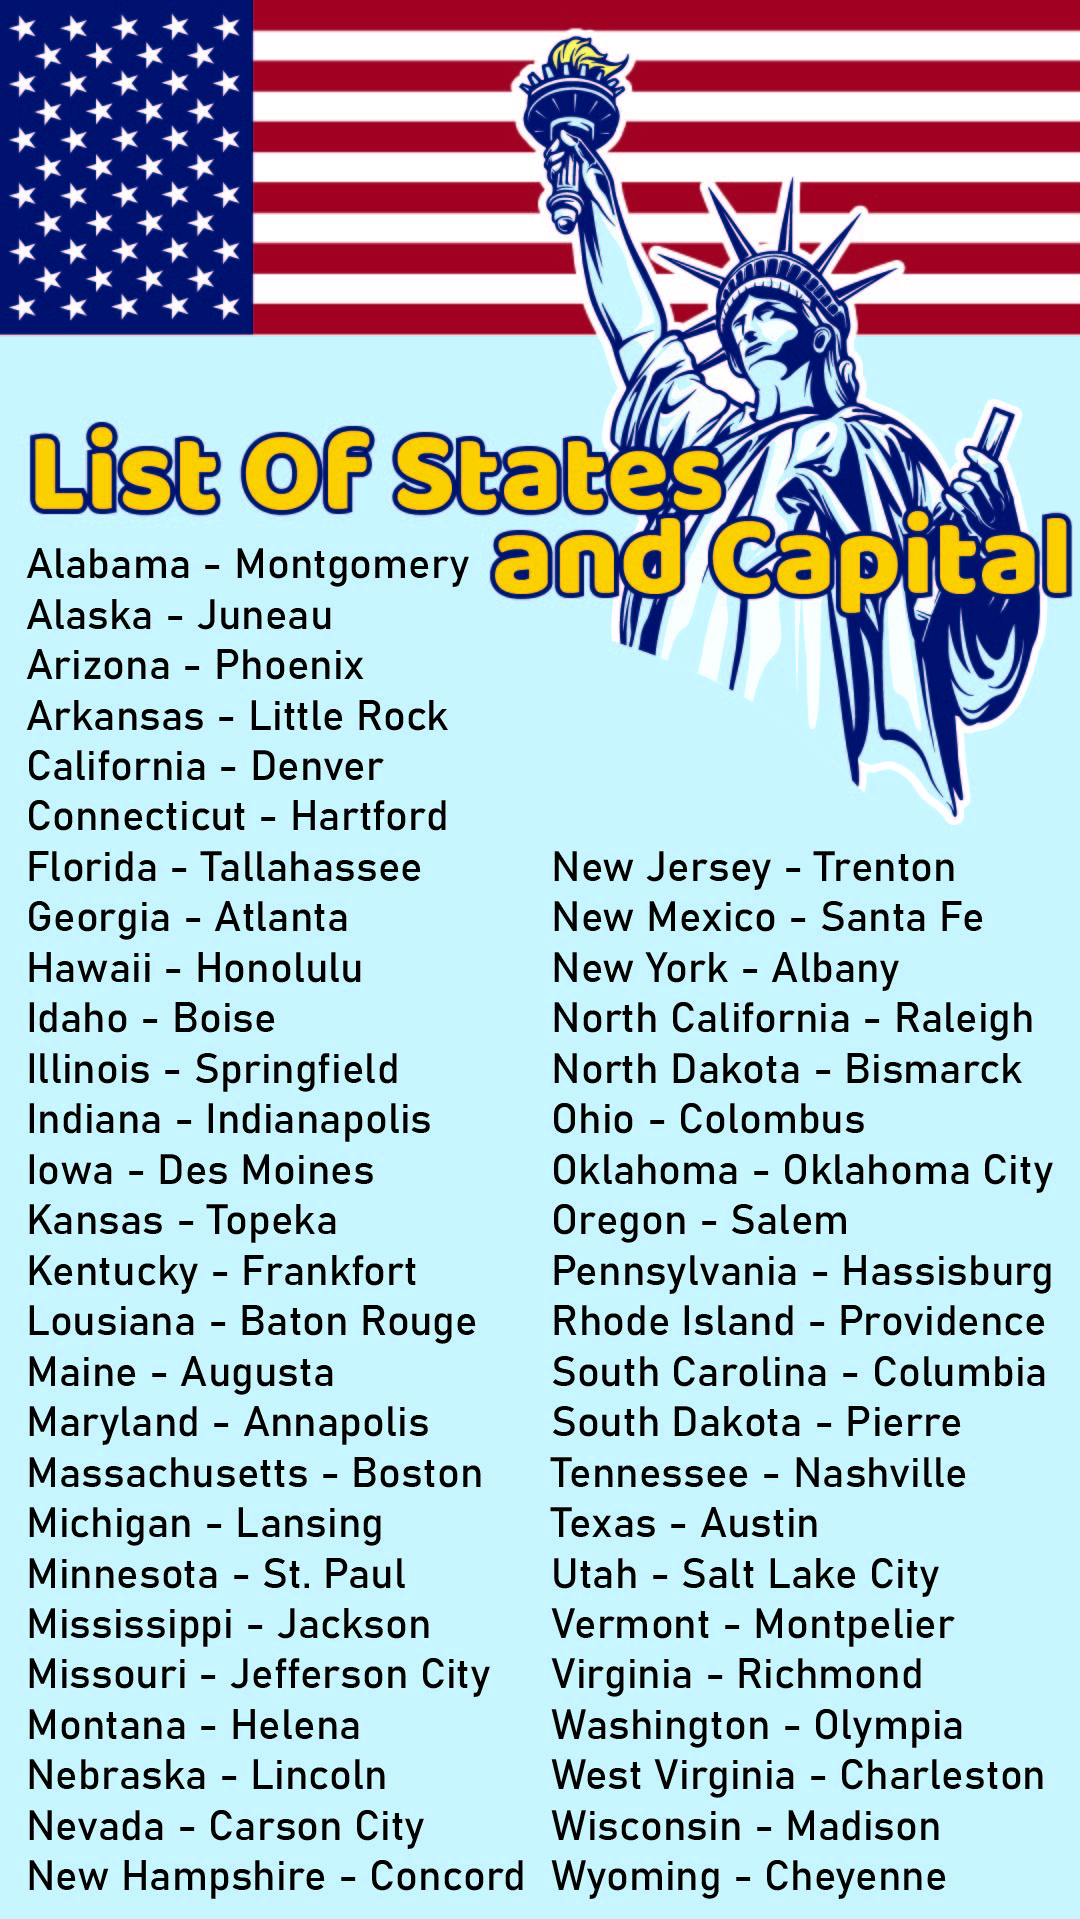 alphabetical-order-printable-list-of-50-states-and-capitals-u-s-a-images